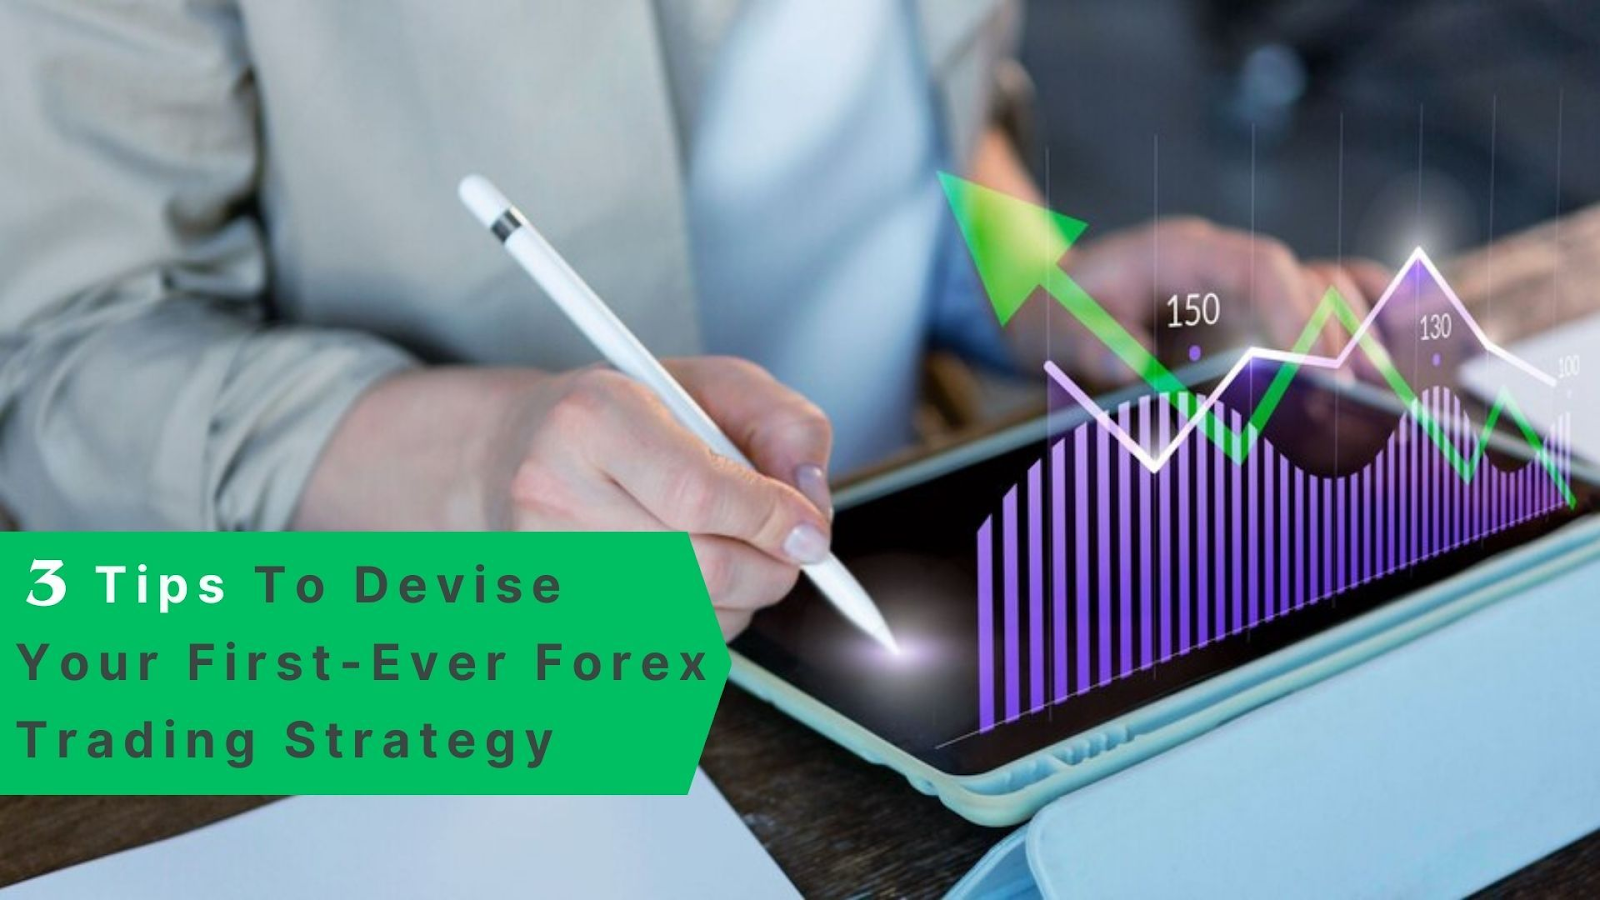 3 Tips To Devise Your First-Ever Forex Trading Strategy